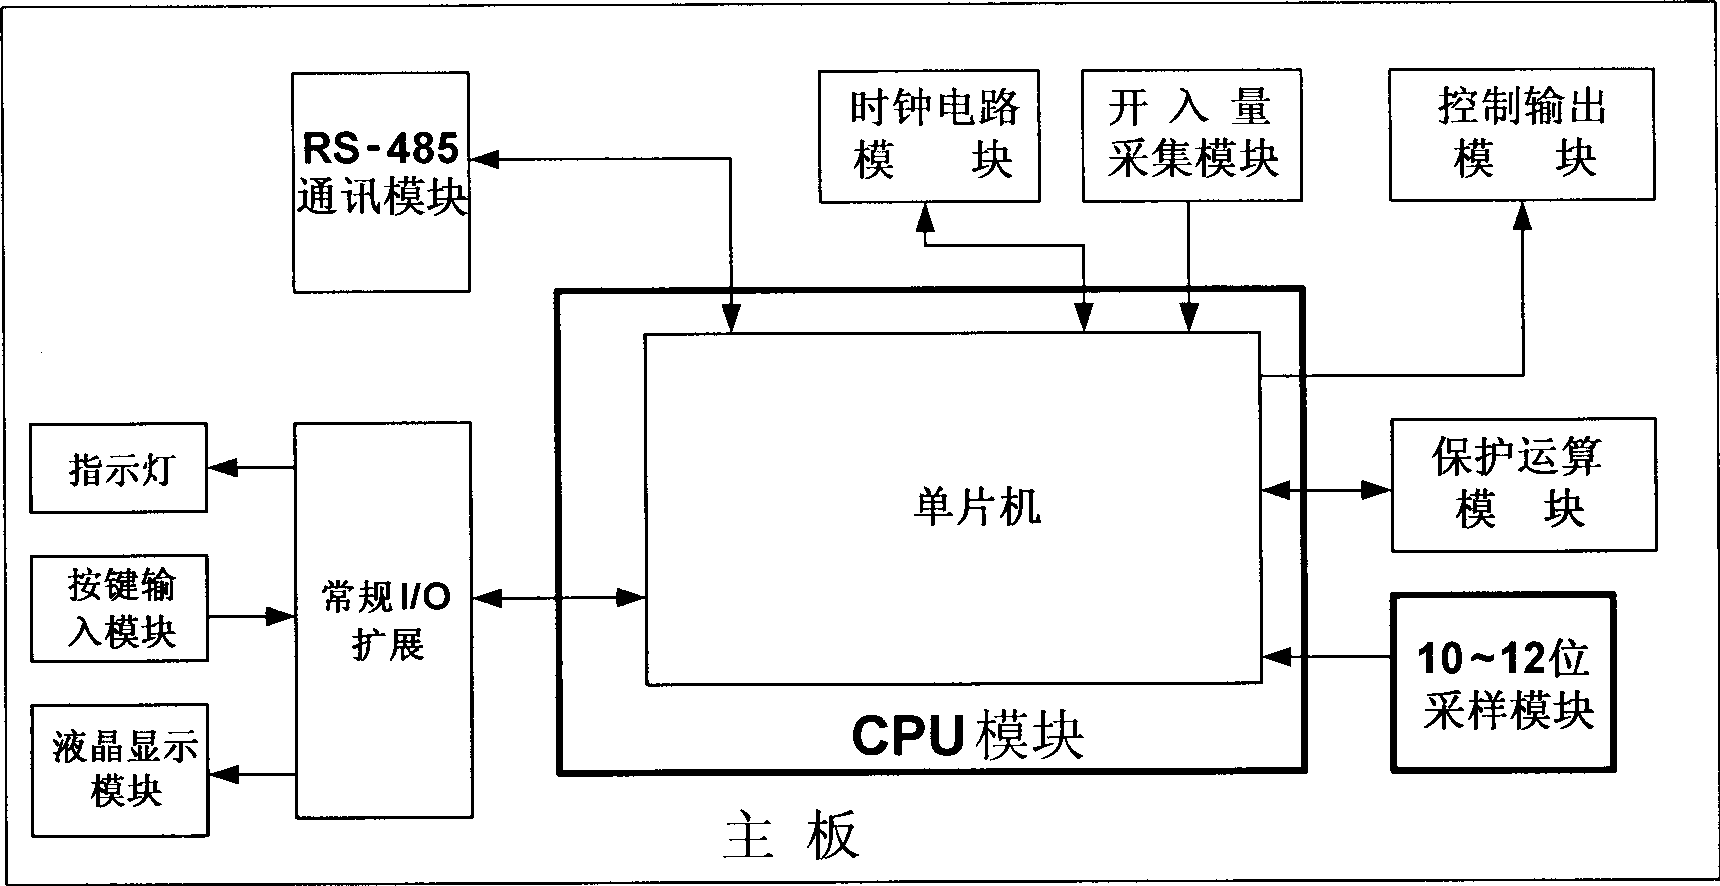 Mainboard using 32-bit DSP as kernel for microcomputer protection device